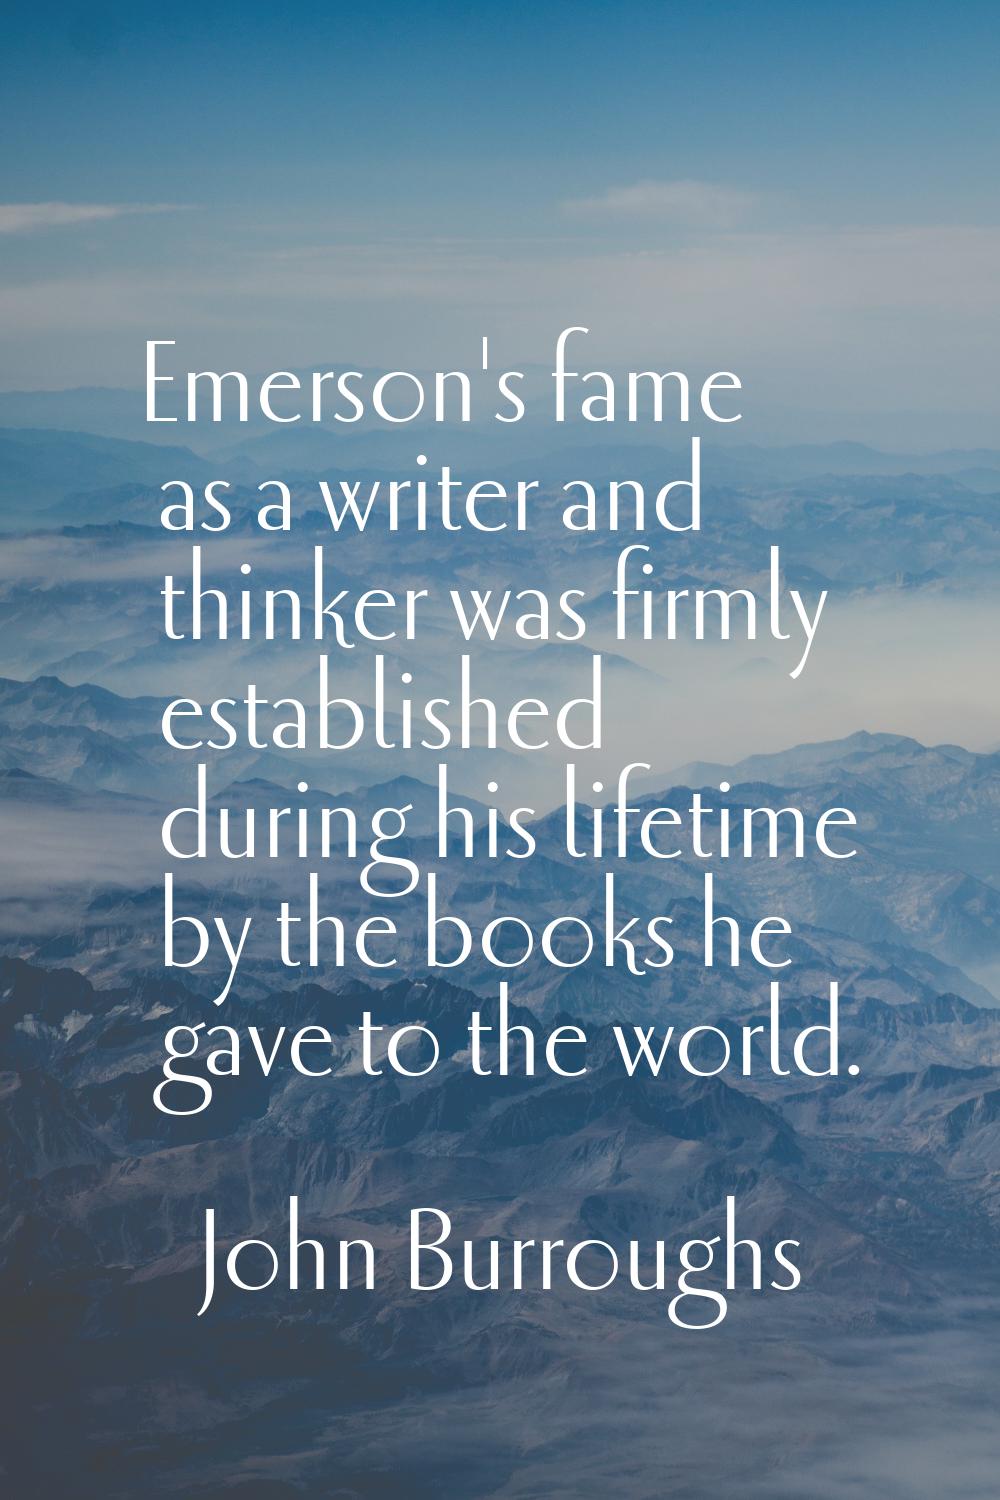 Emerson's fame as a writer and thinker was firmly established during his lifetime by the books he g